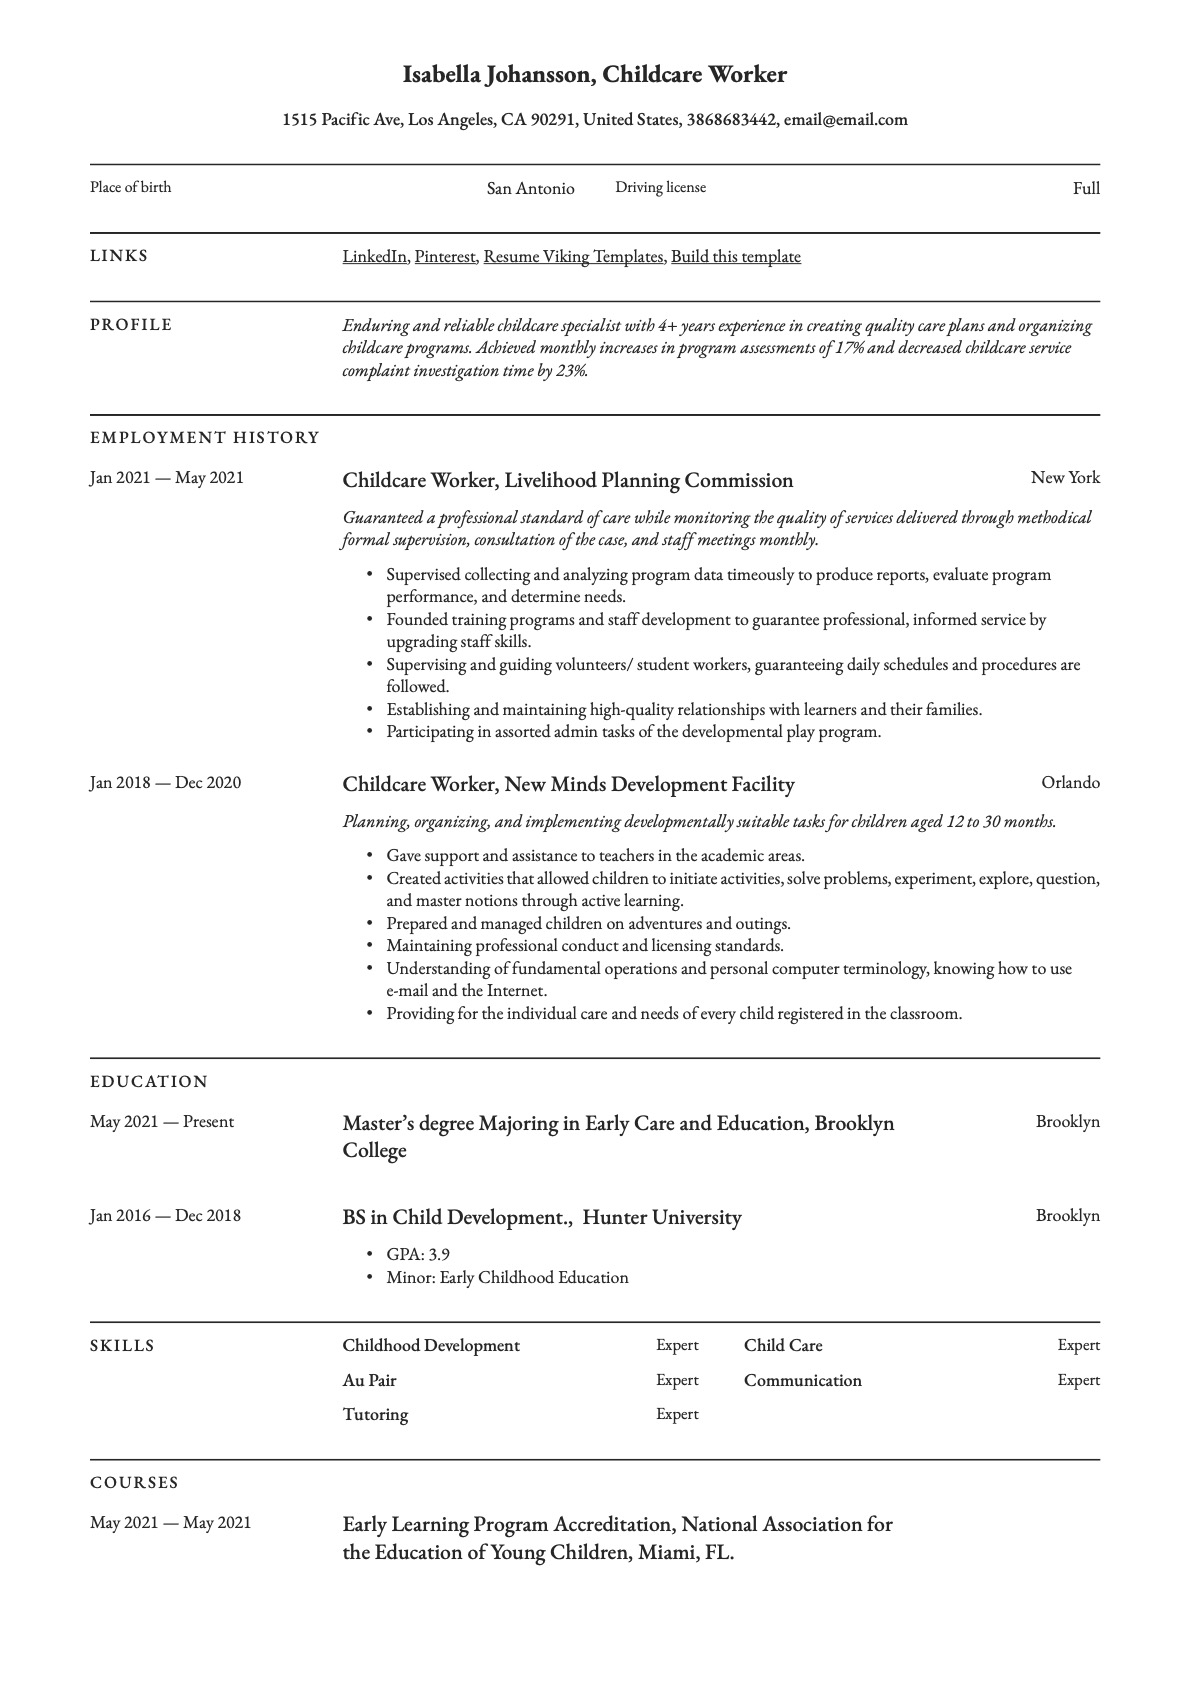 Professional Child Care Worker Resume Template